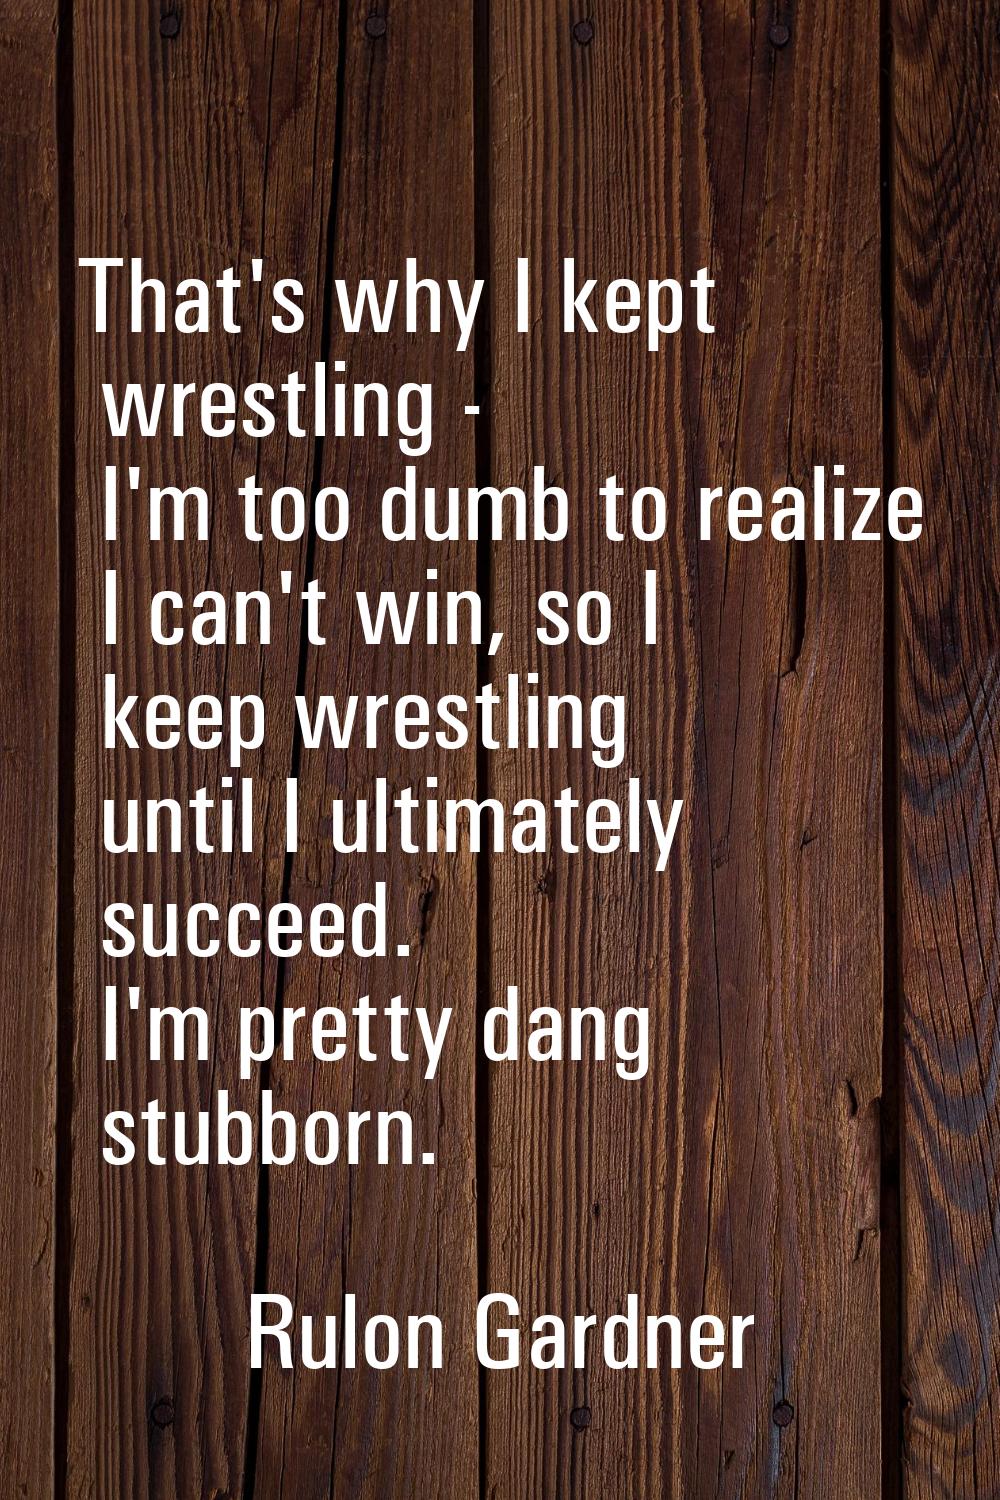 That's why I kept wrestling - I'm too dumb to realize I can't win, so I keep wrestling until I ulti